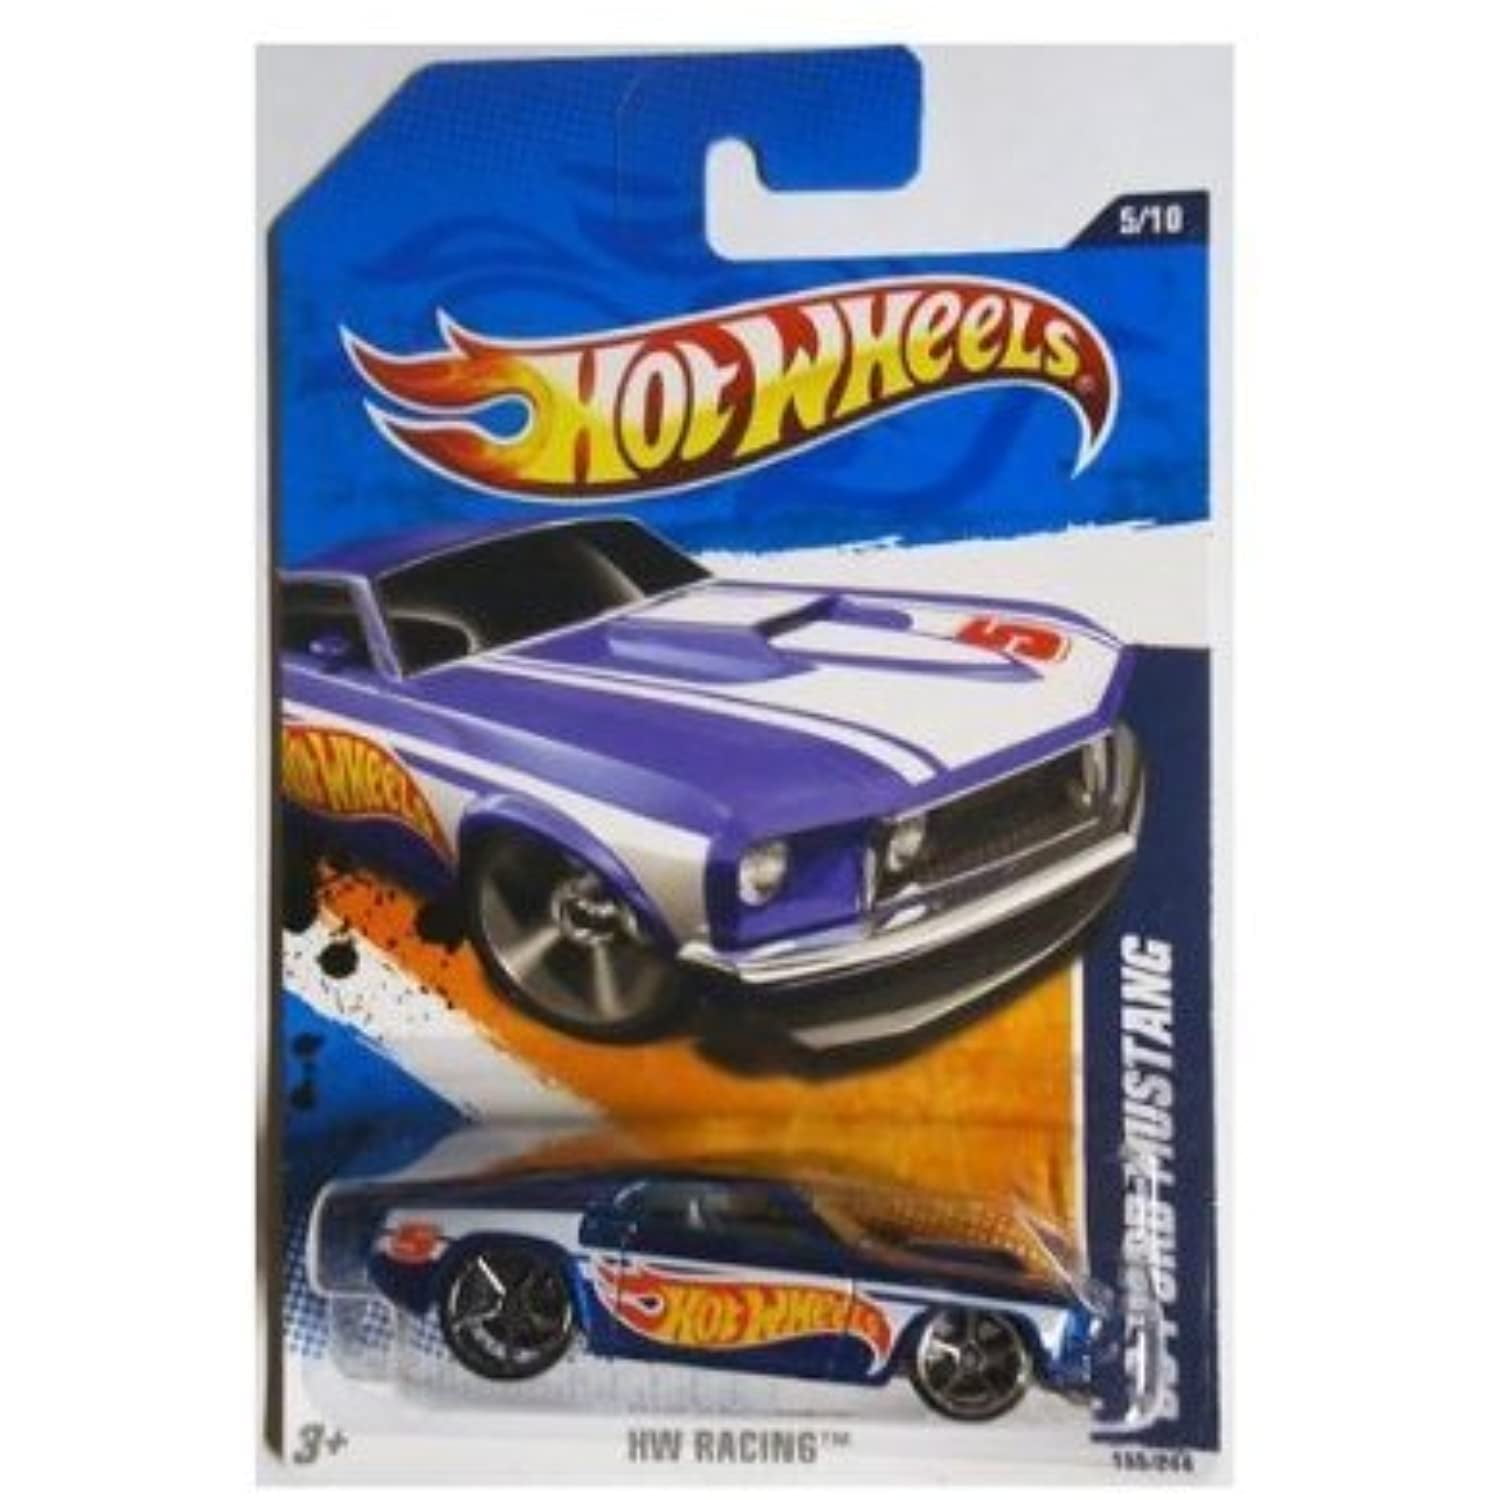 2011 Hot Wheels #155 HW Racing 5/10 ‘69 FORD MUSTANG Blue Variant w/Chrome OH5Sp 